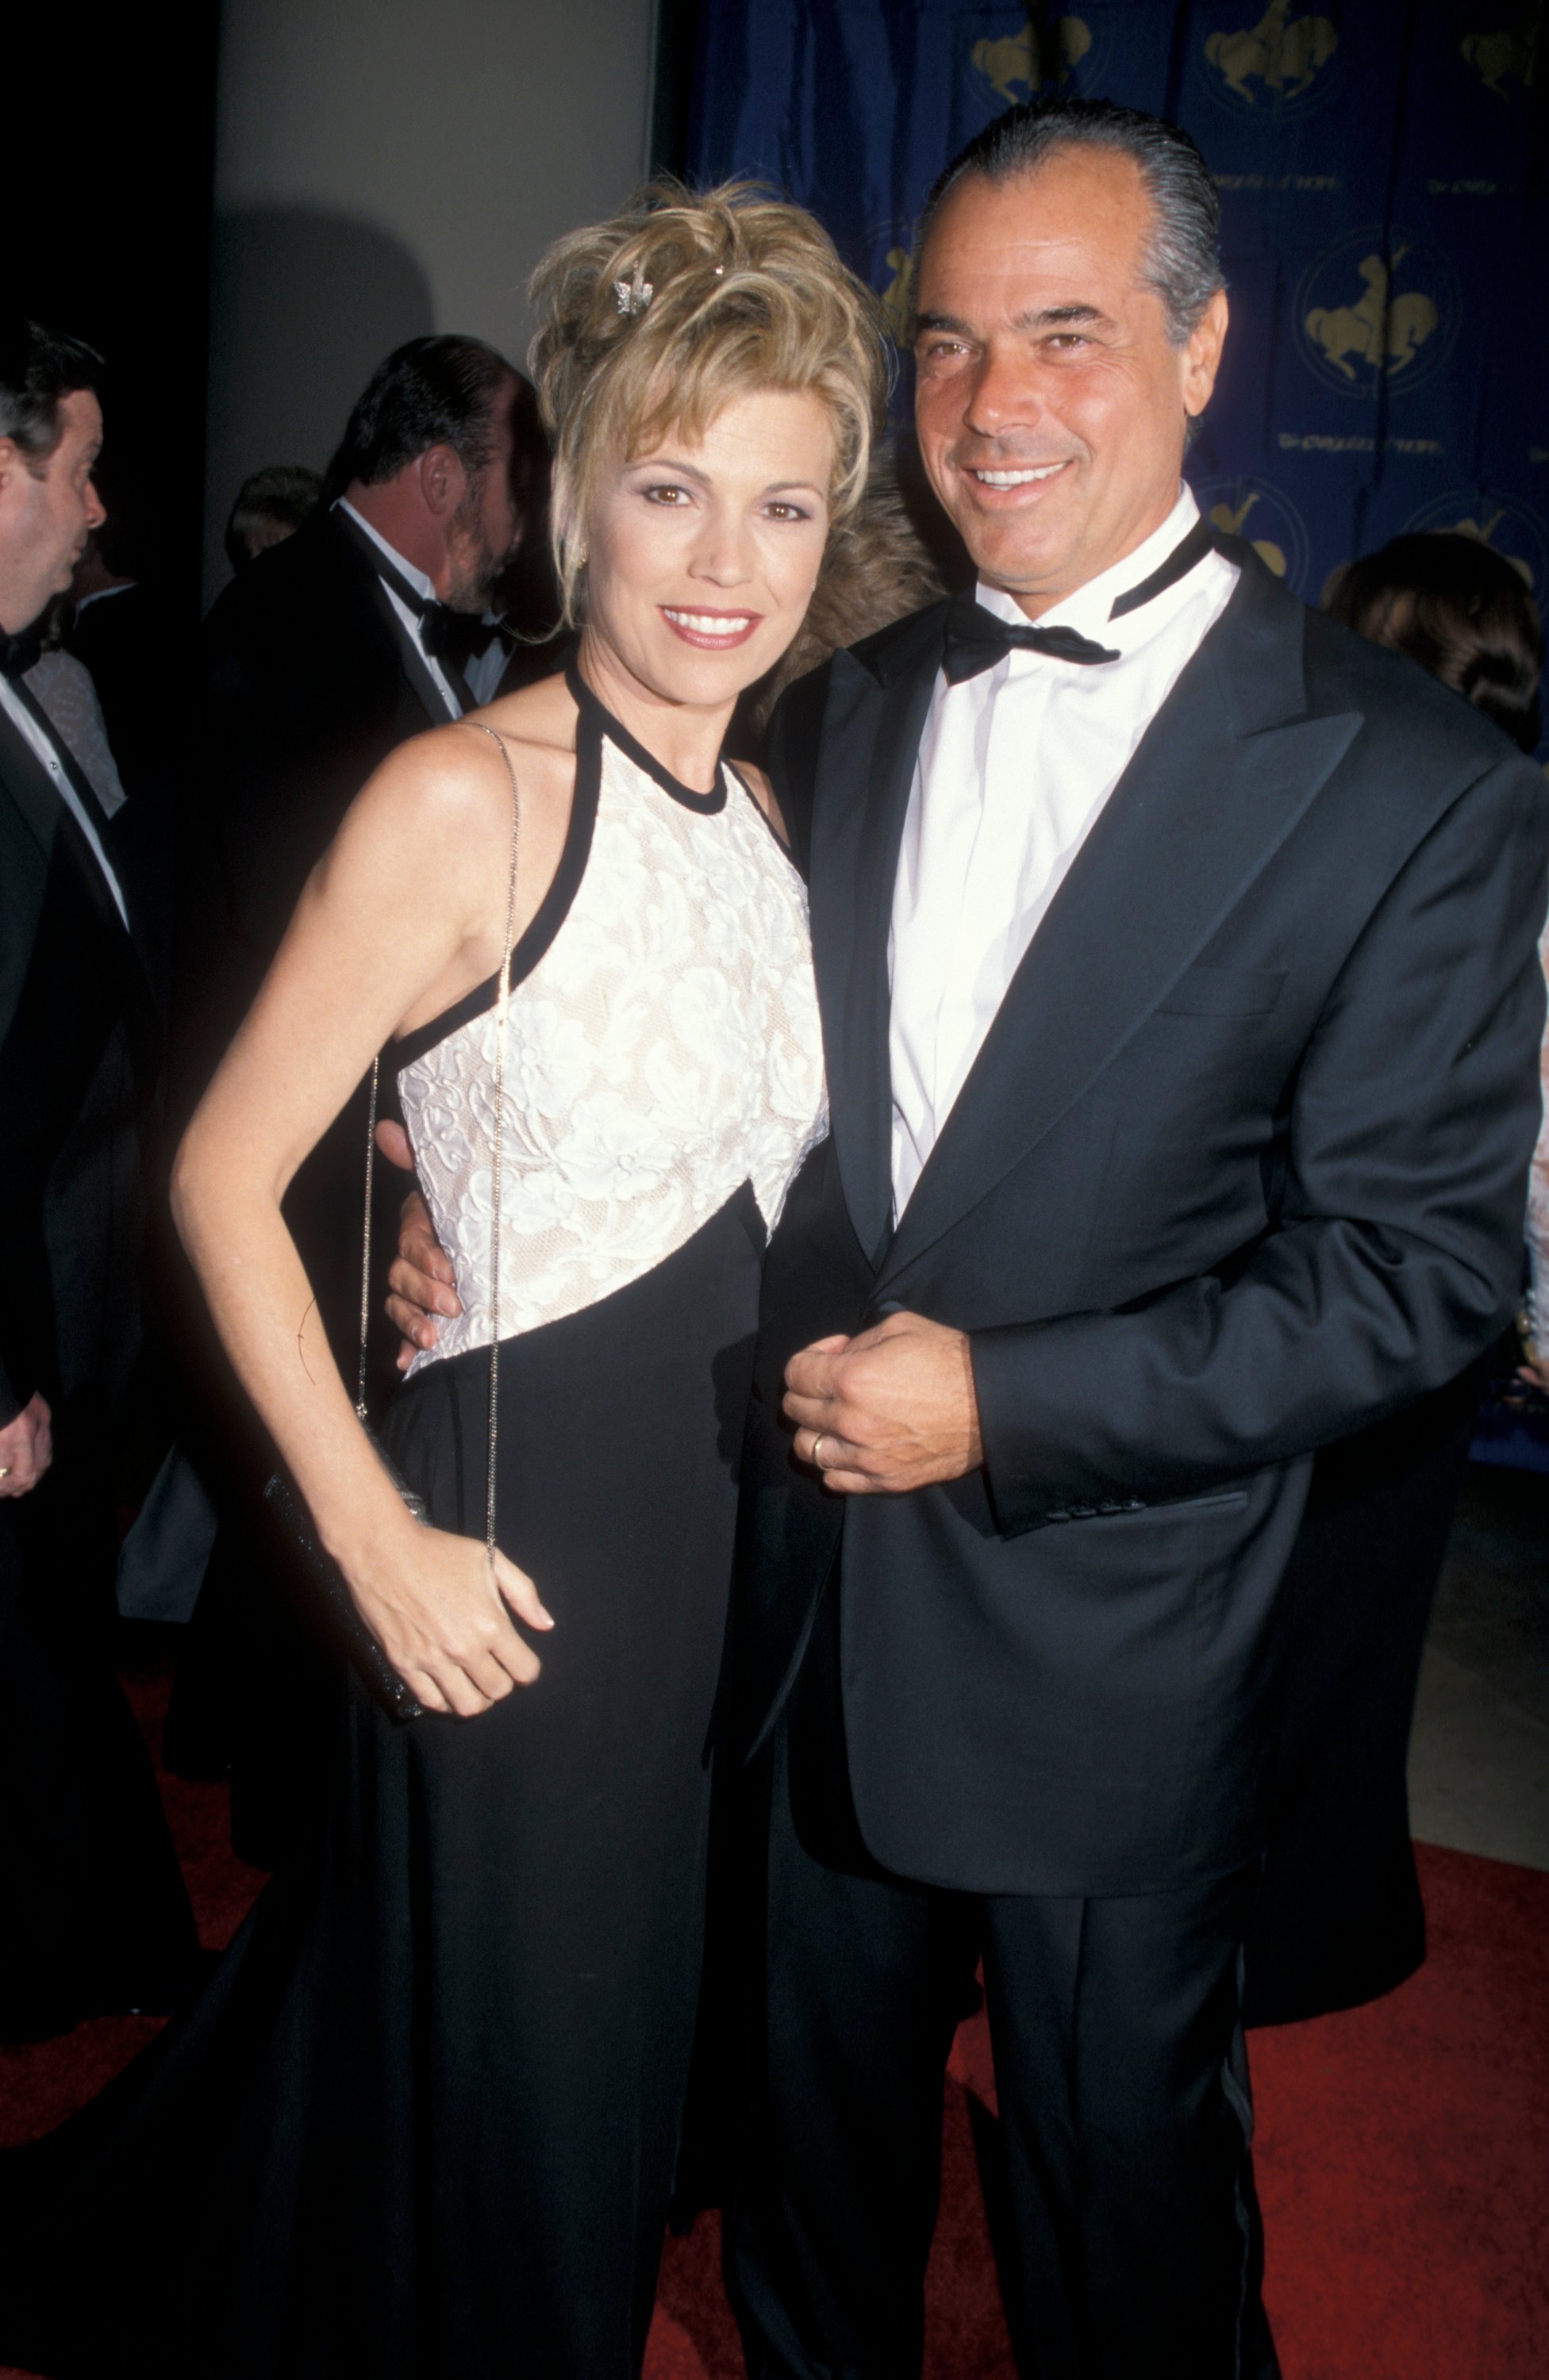  Vanna White and then-husband George Santopietro smiling at benefit together